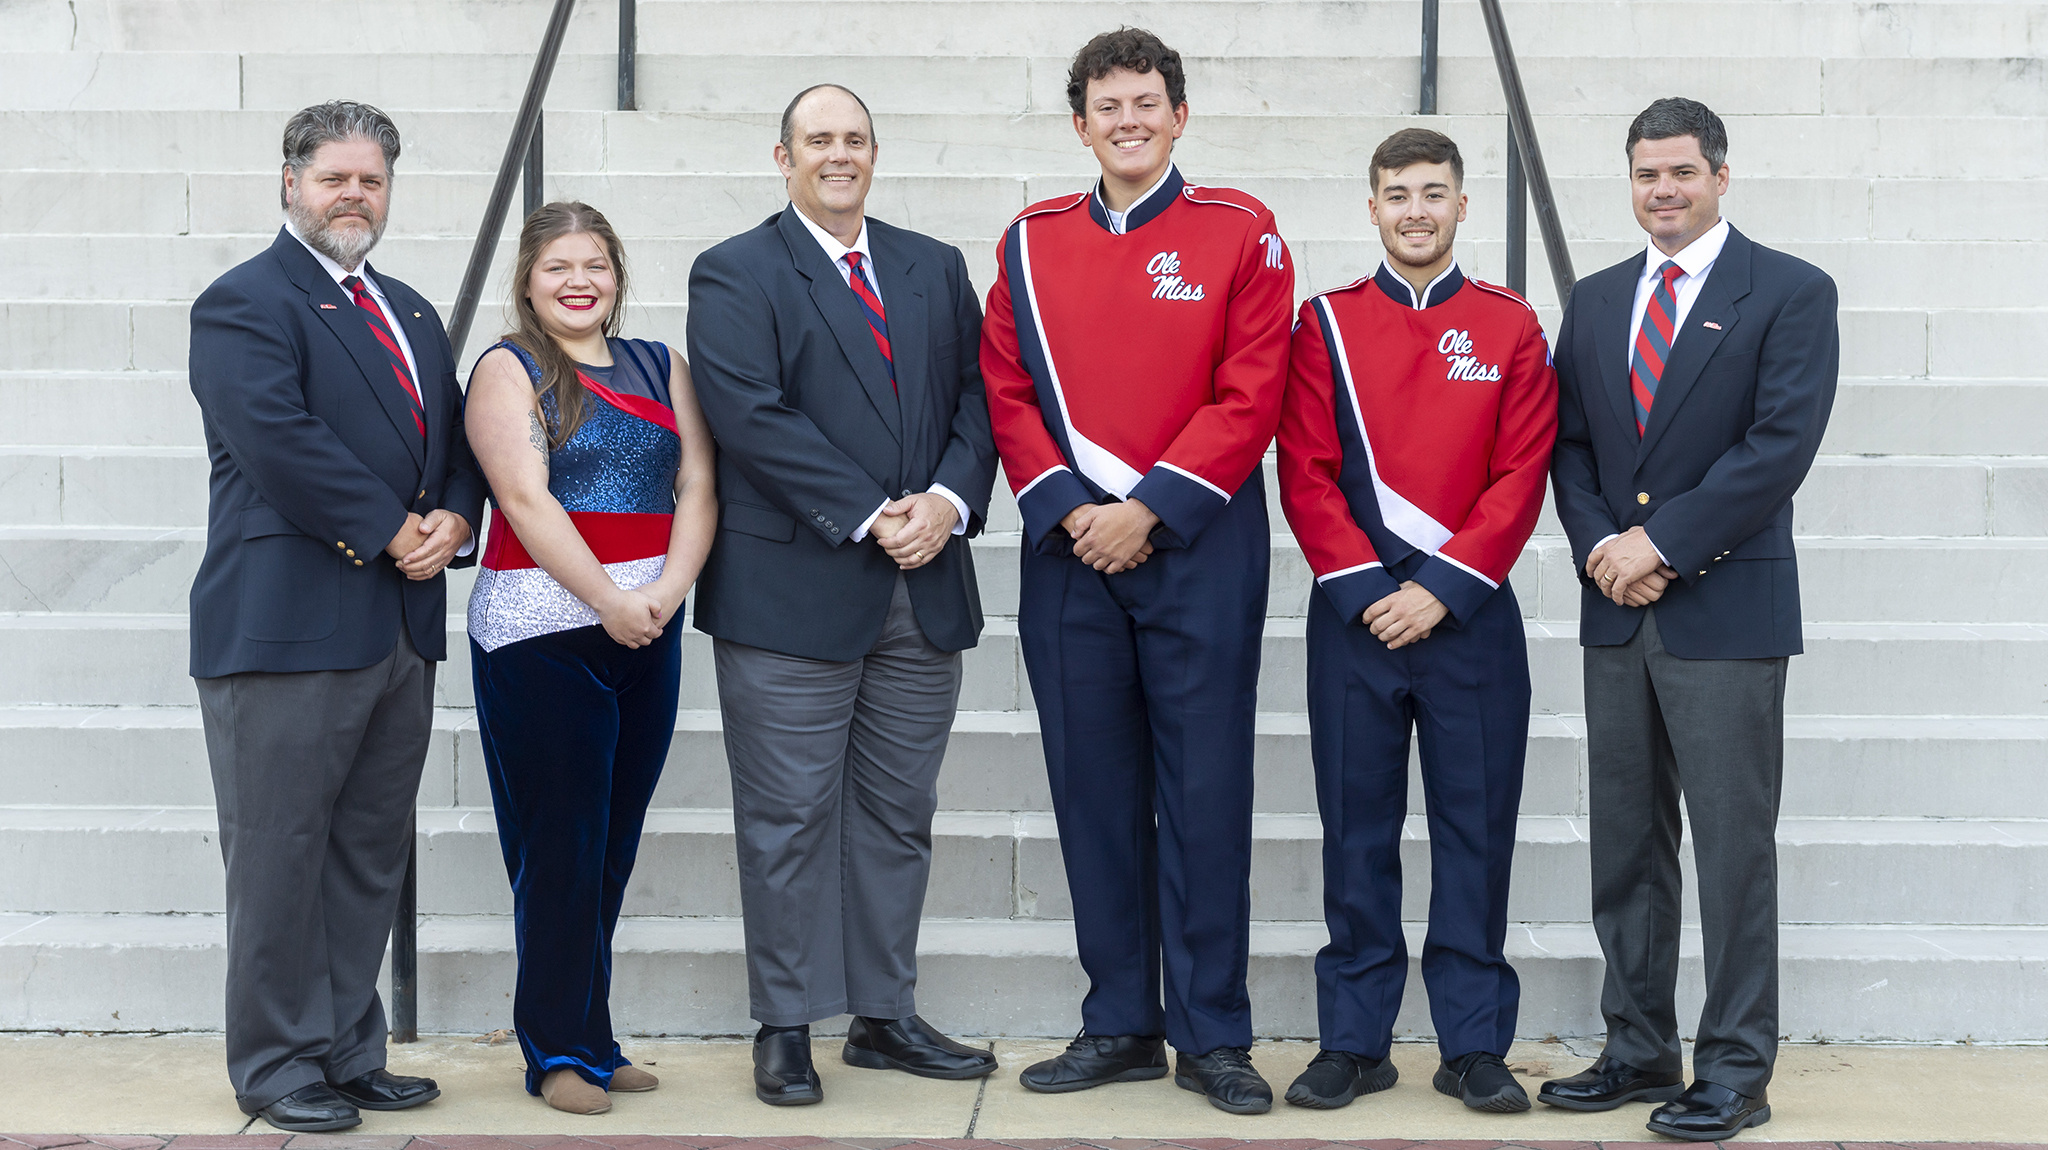 For the first time ever, all the Pride of the South marching band ‘s directors have children in the band. The directors and their children are (from left) Mel Morse and his daughter, Emily Morse; Tim Oliver and his son, Ben Oliver; and Cooper Dale and his dad, Randy Dale. Photo by Srijita Chattopadhyay/Ole Miss Digital Imaging Services